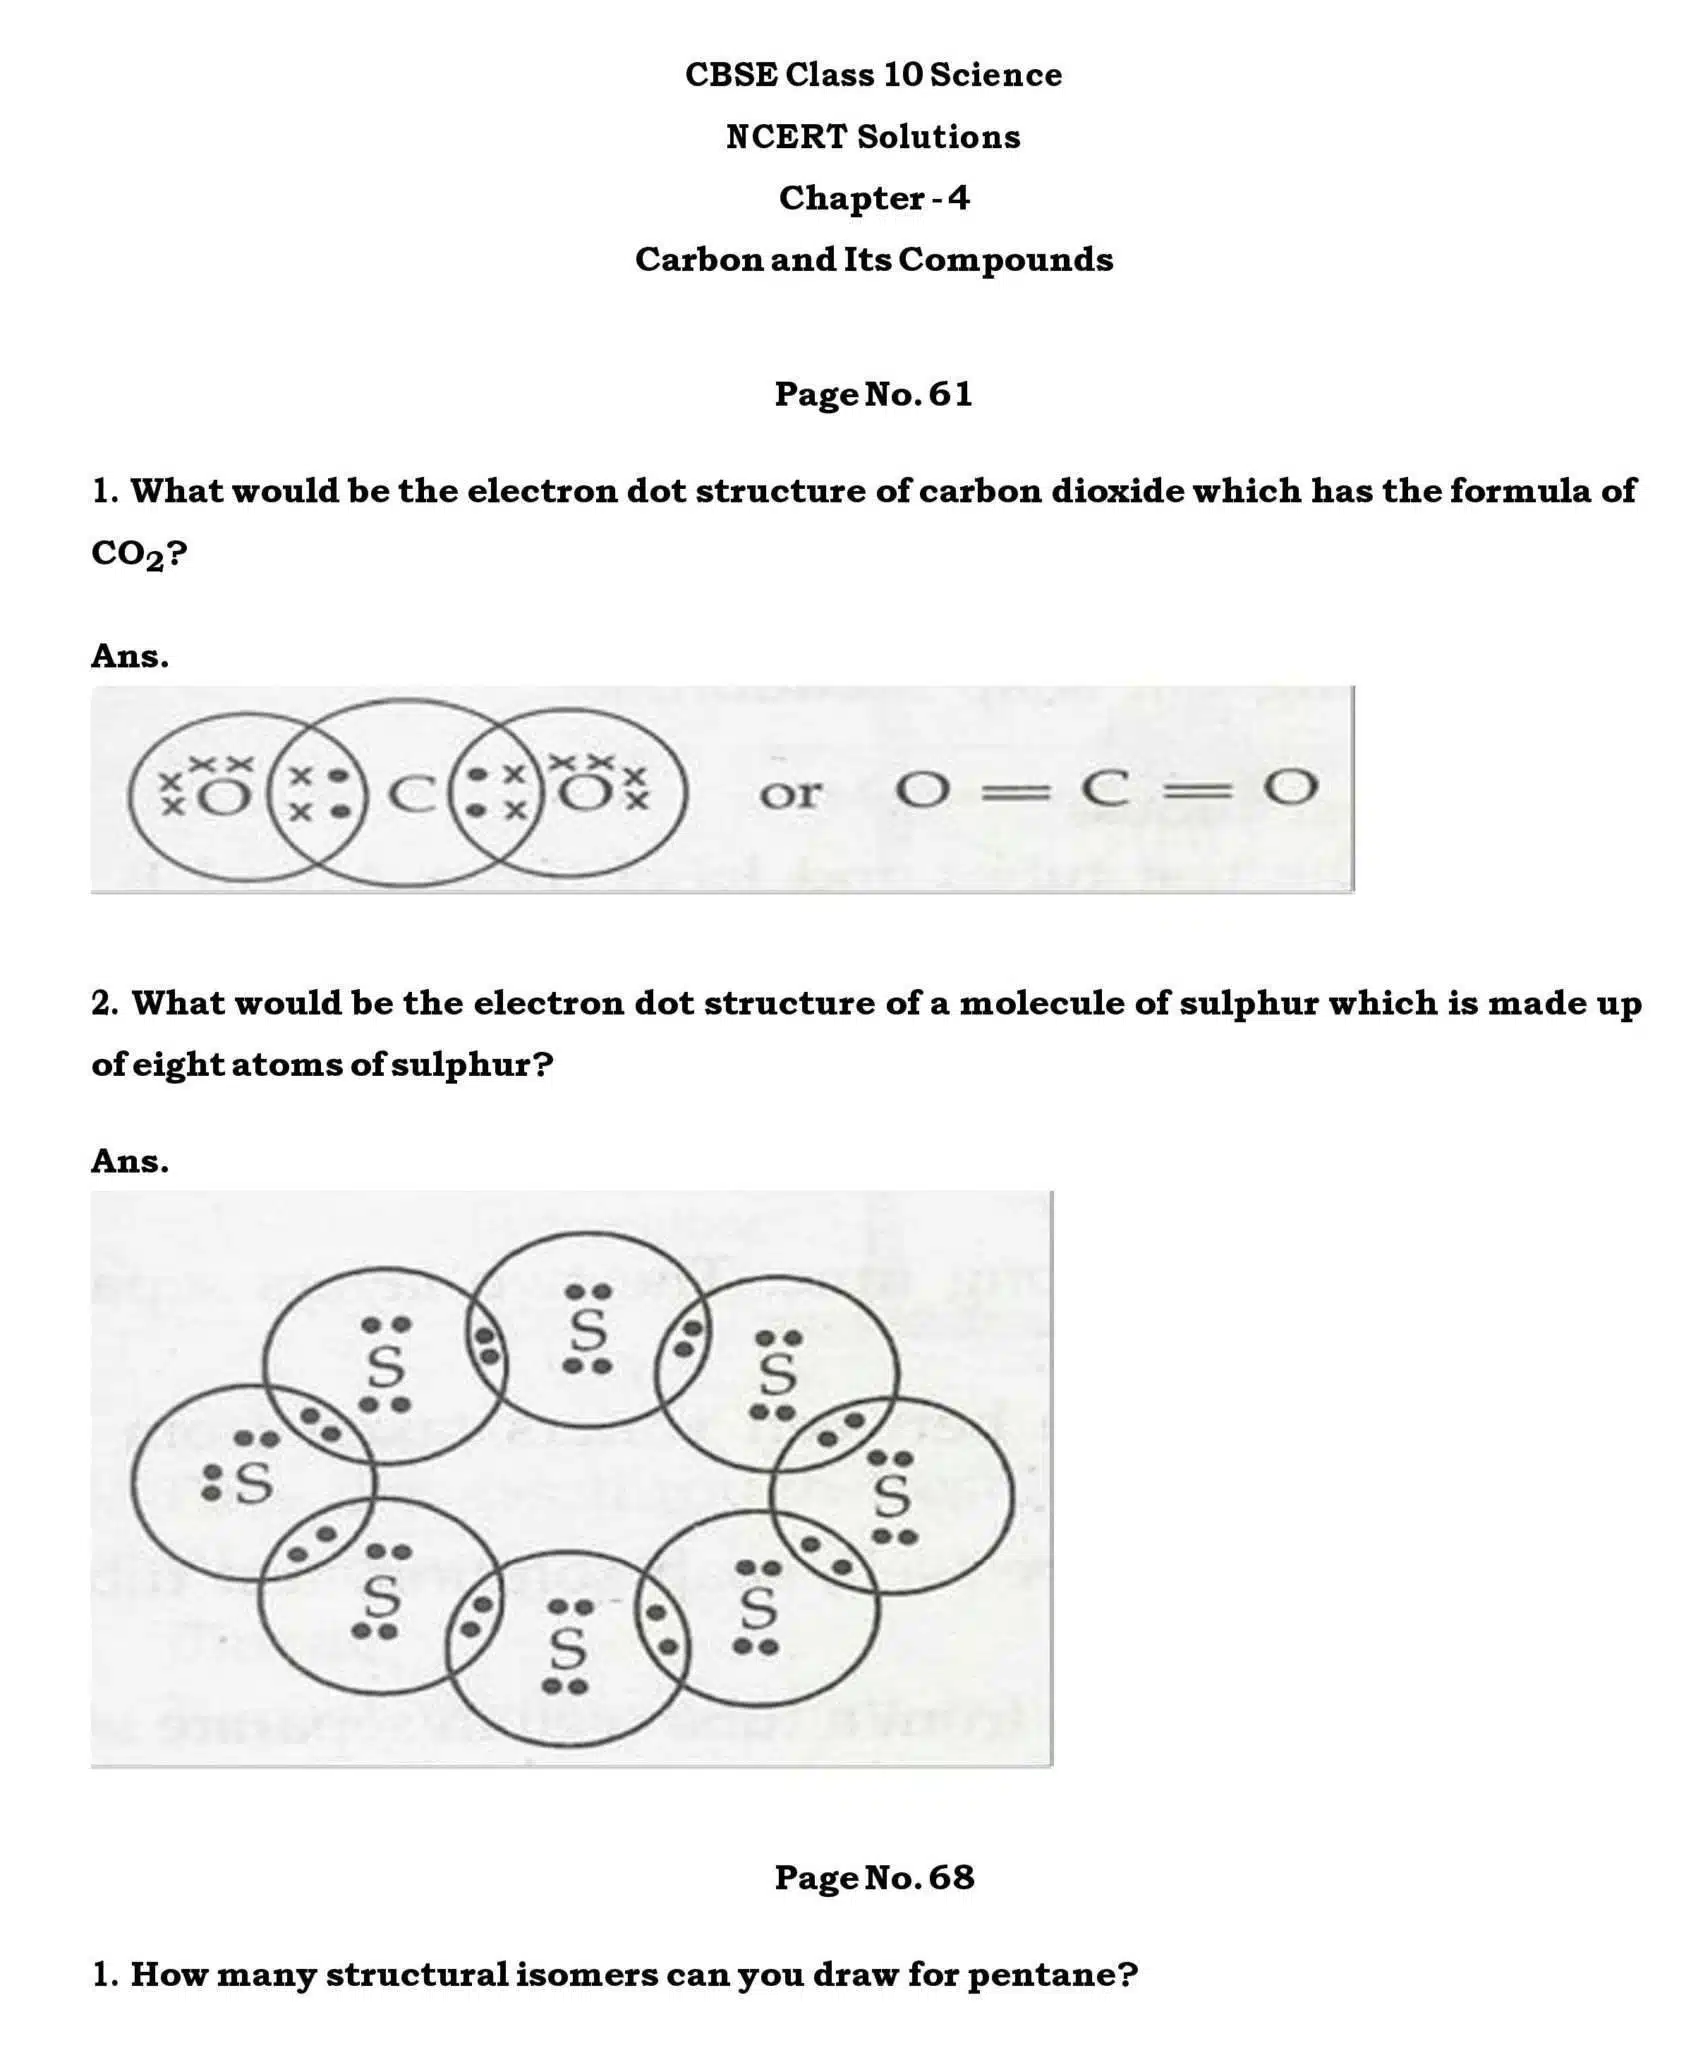 Ch 4 Science Carbon and Its Compounds page 001